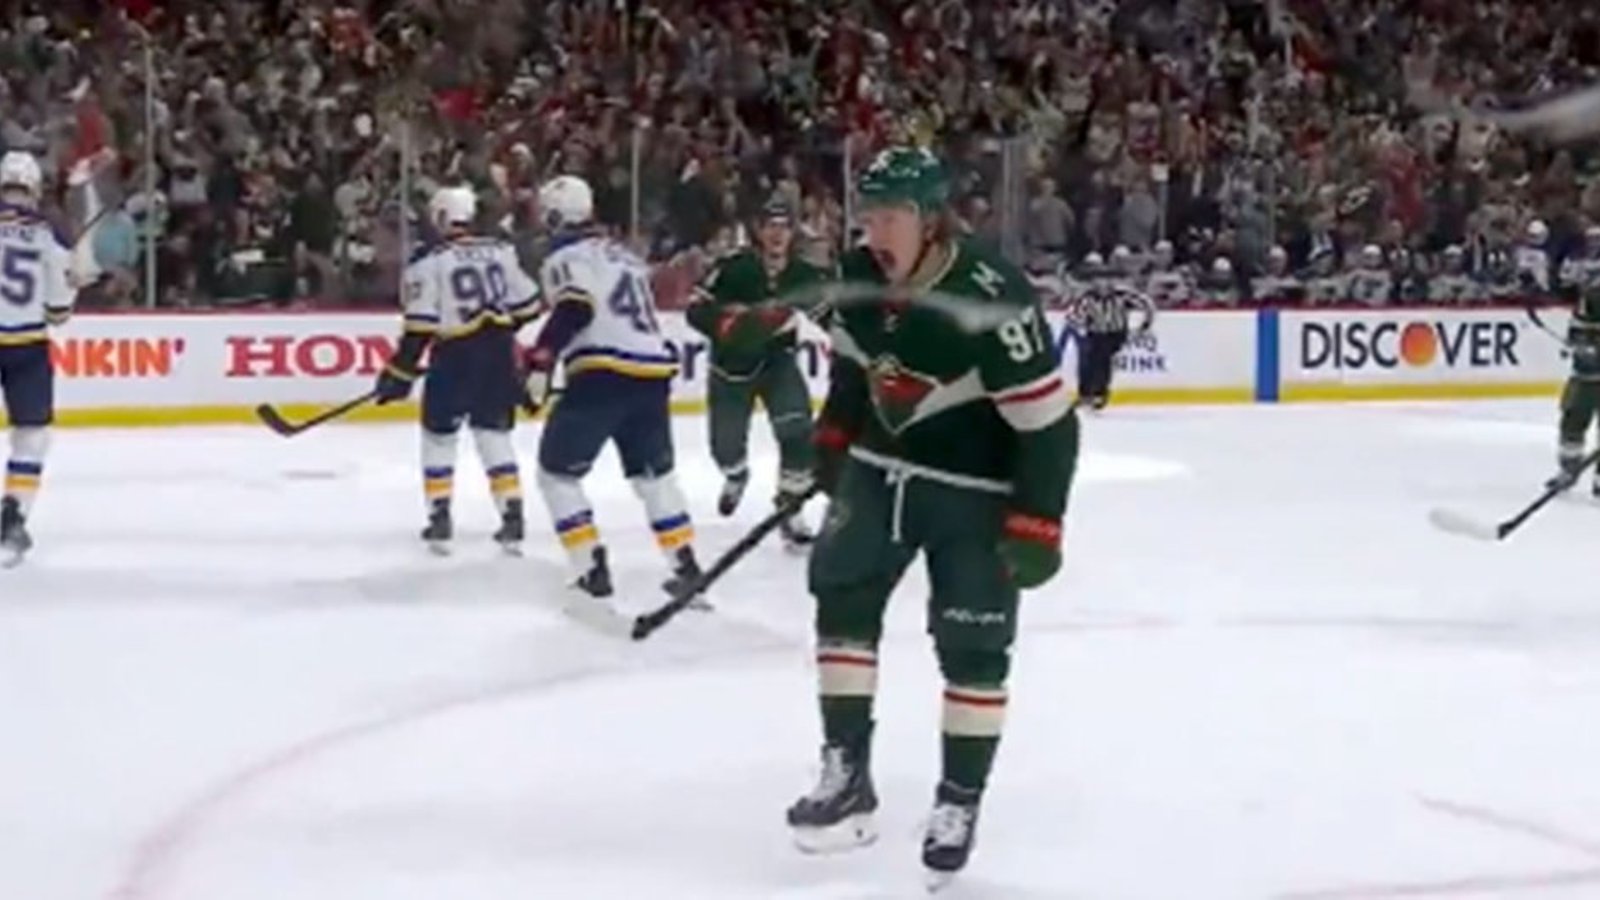 Kaprizov gives the Wild the lead with an insane snipe